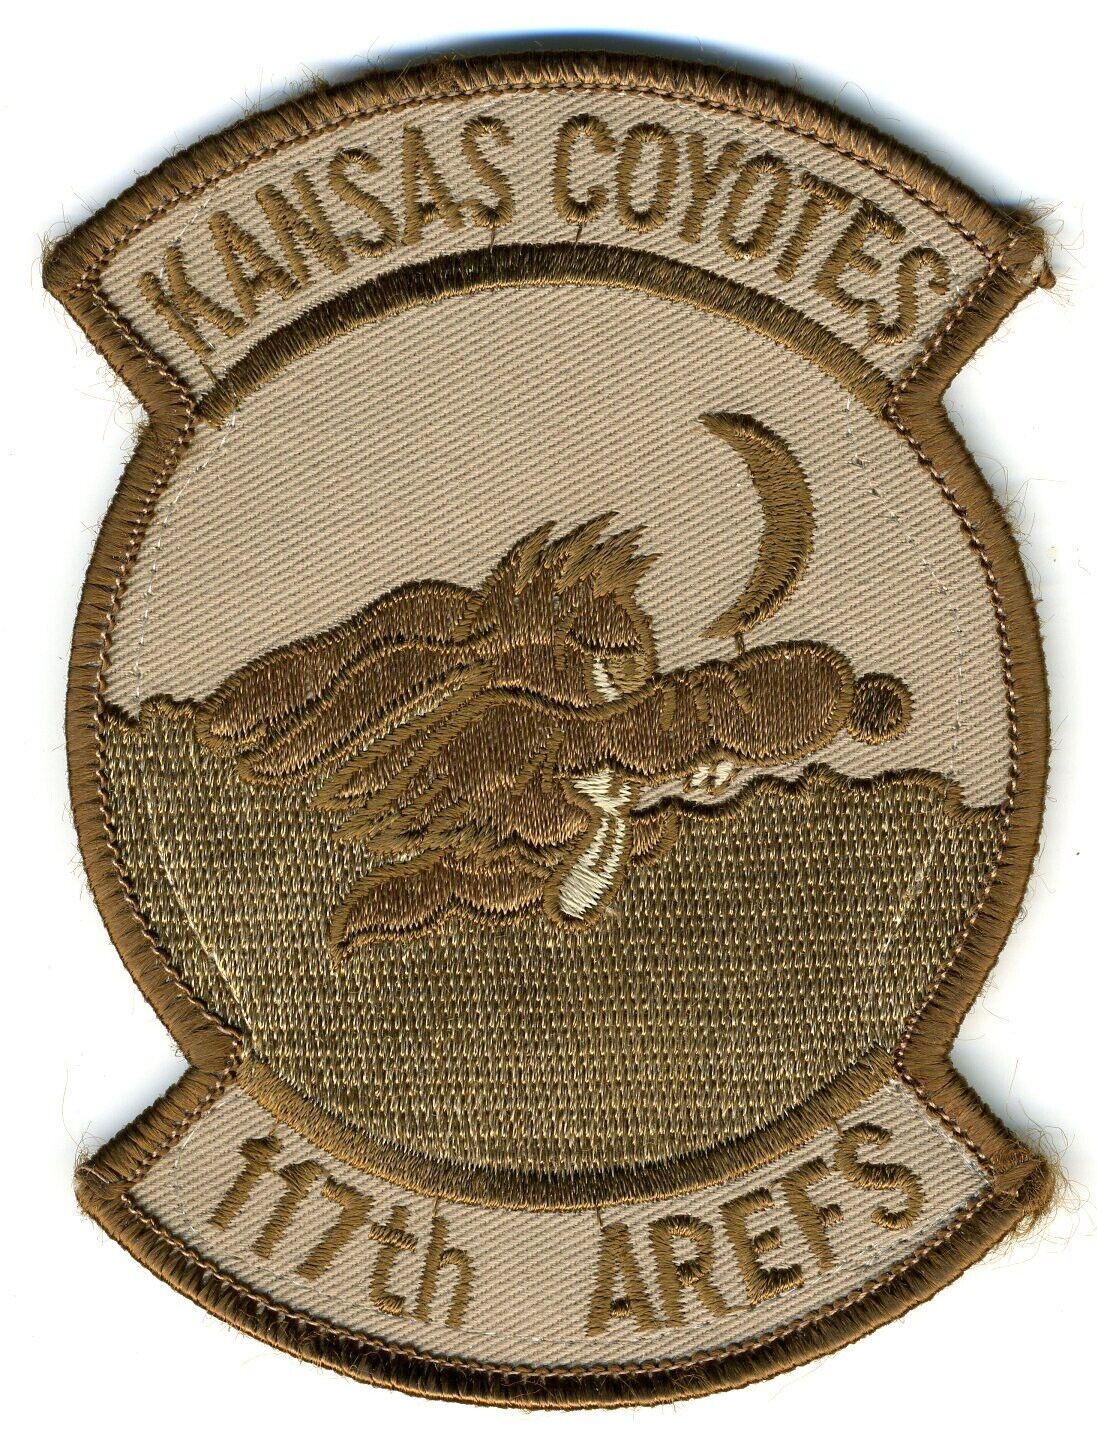 US Air Force Patch: 117th Air Refueling Squadron Operation Northern Watch